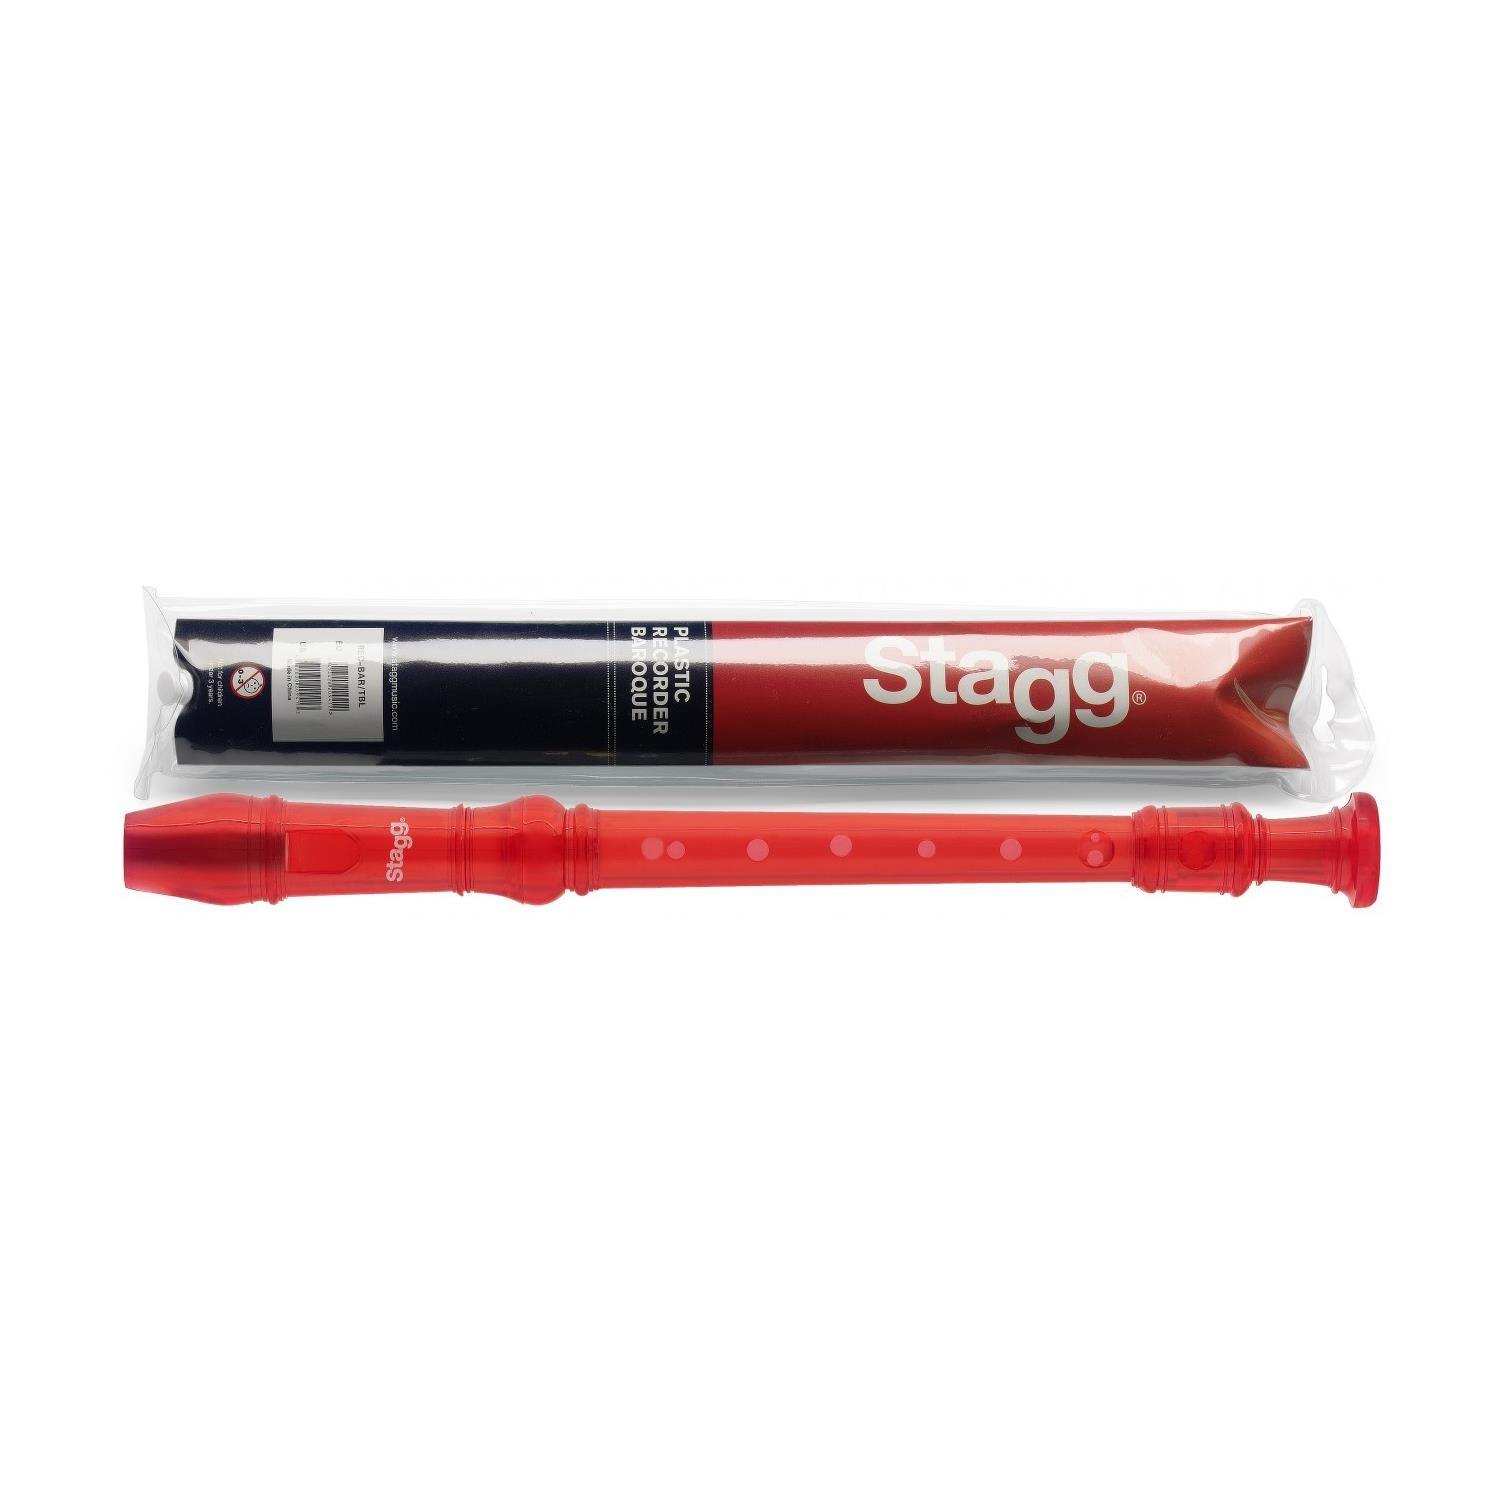 Stagg REC-BAR/TRD Soprano Recorder with Baroque Fingering Red - DY Pro Audio